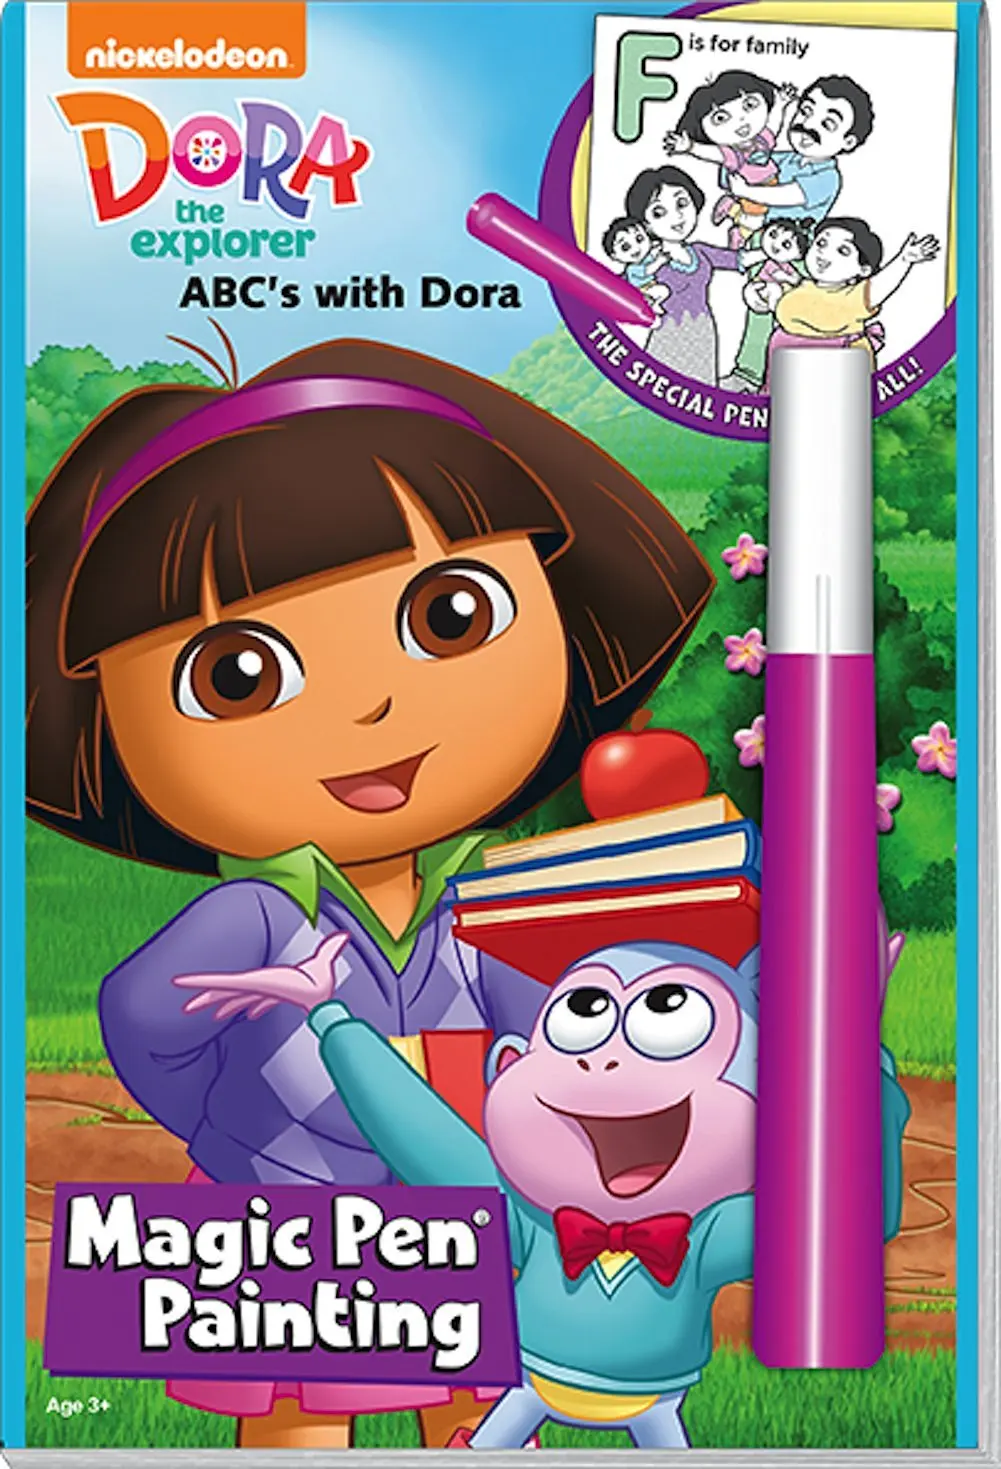 Cheap Dora Painting Games Find Dora Painting Games Deals On Line At Alibaba Com .to play, dora games, funny games, classic games, soccer games and many other online games for kids. alibaba com